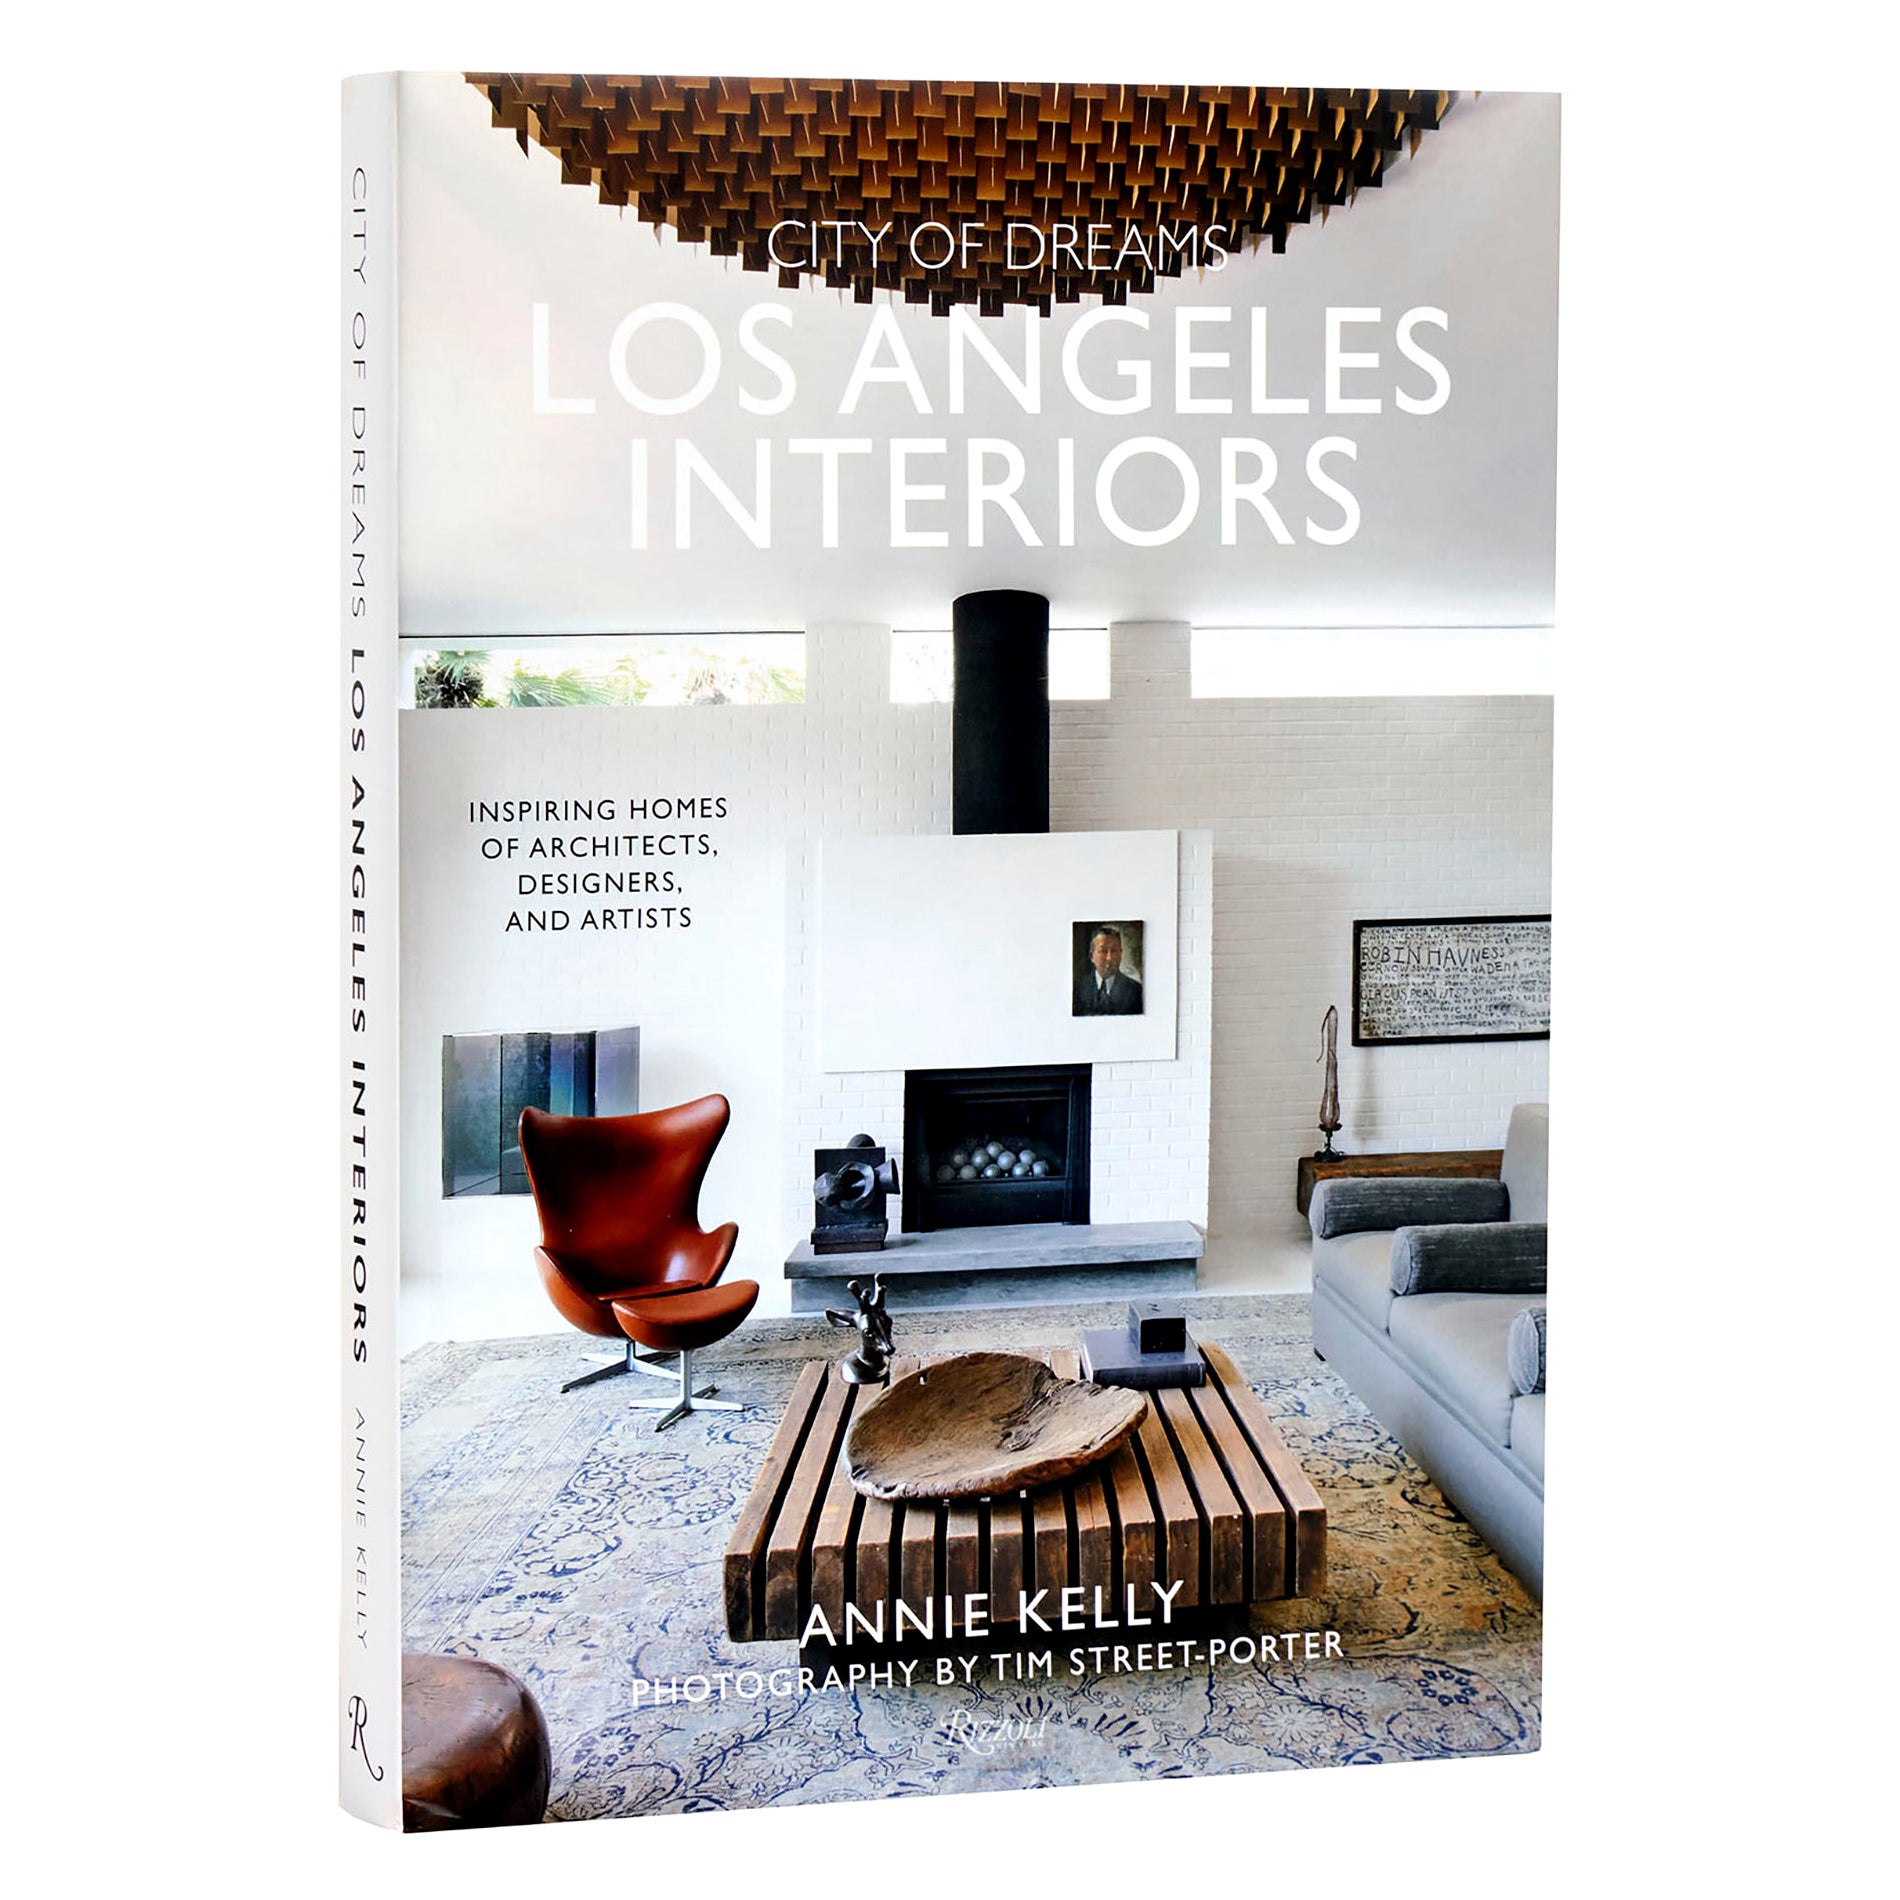 City of Dreams: Los Angeles Interiors: Inspiring Homes of Architects, Designers